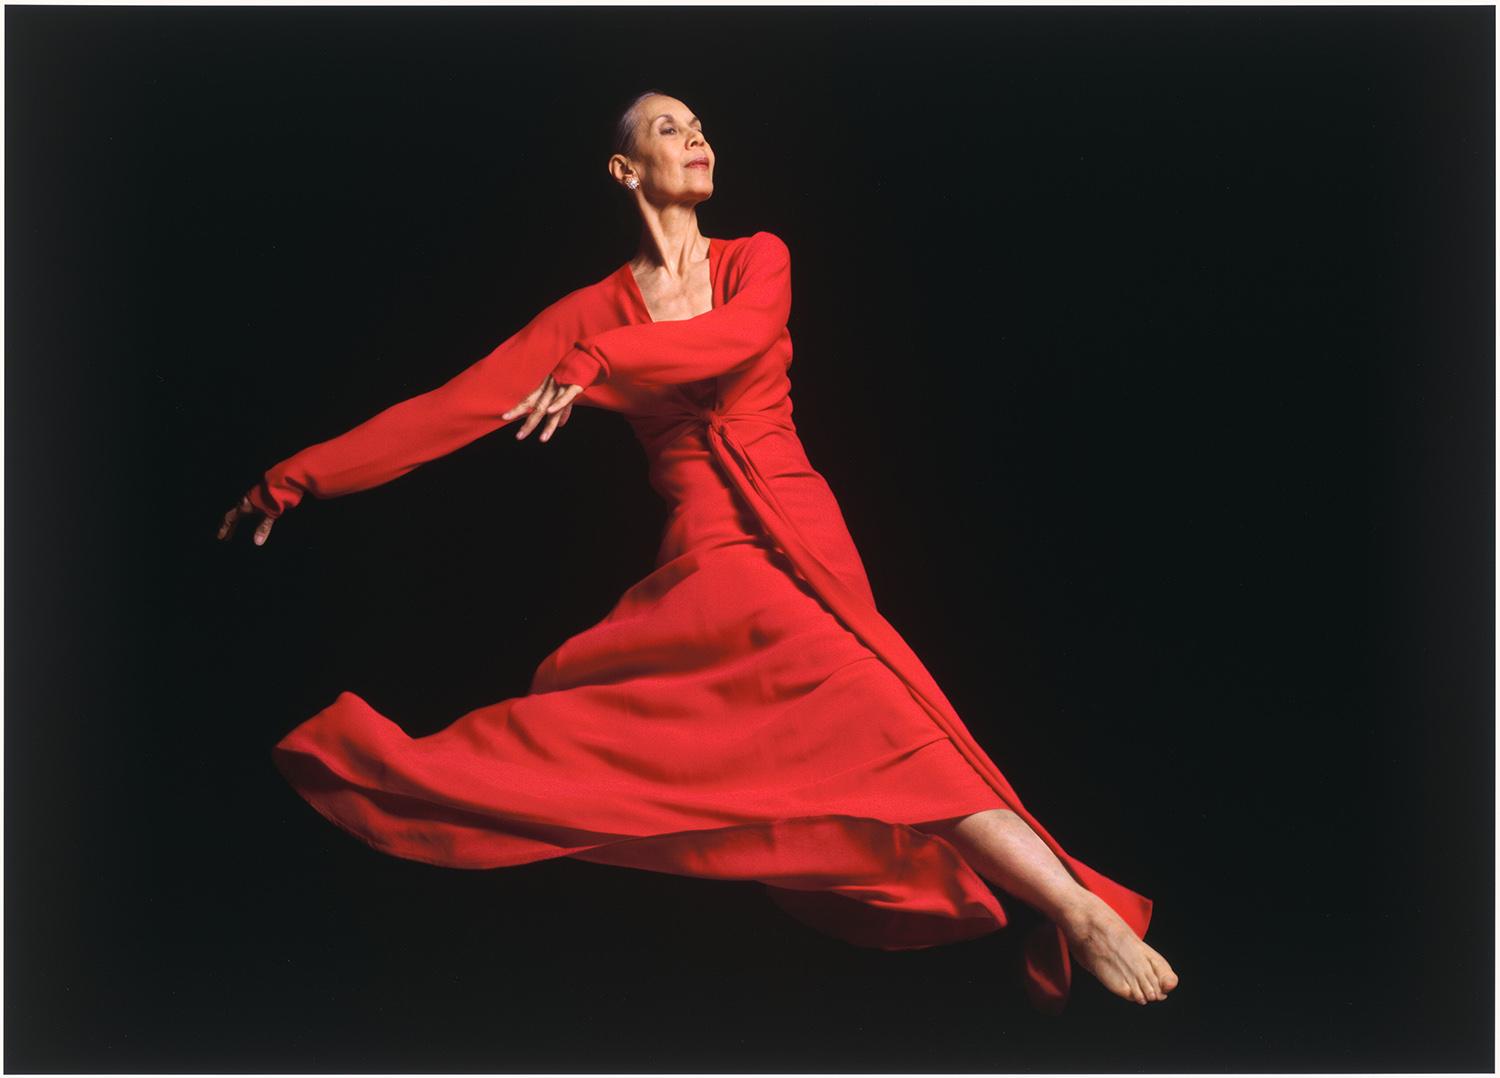 dancer in a red dress against a black background